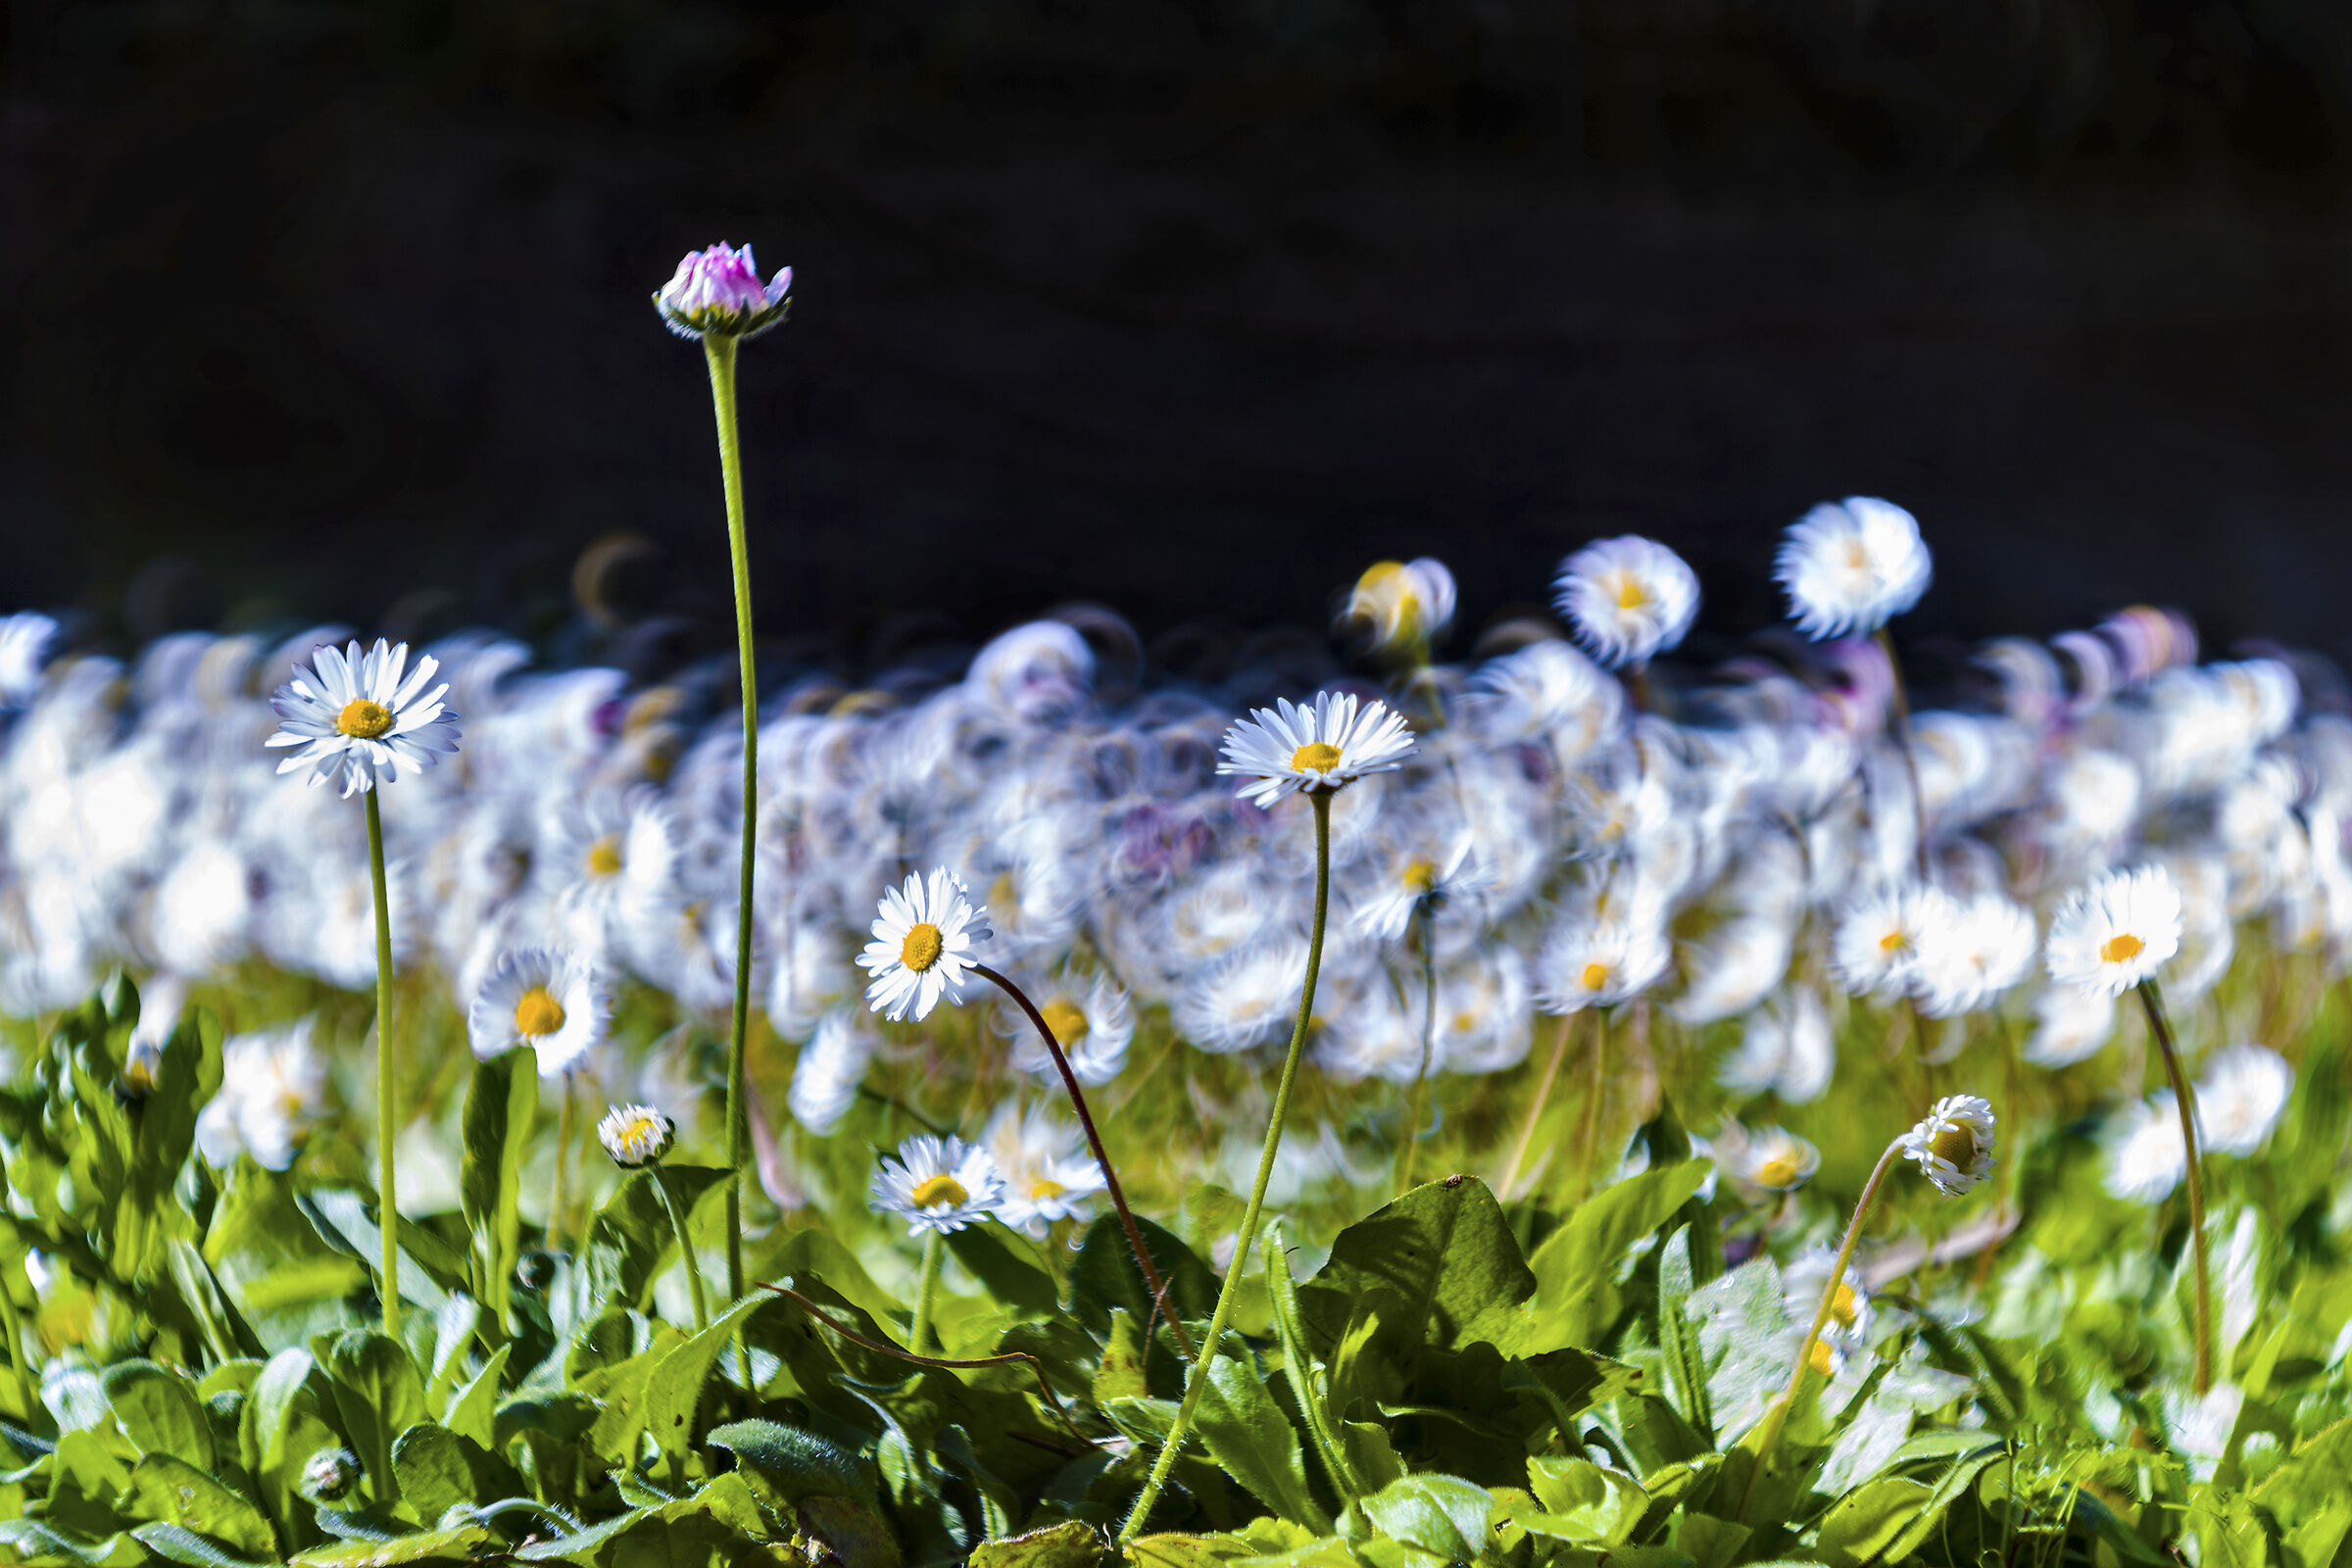 The dance of daisies in spring...